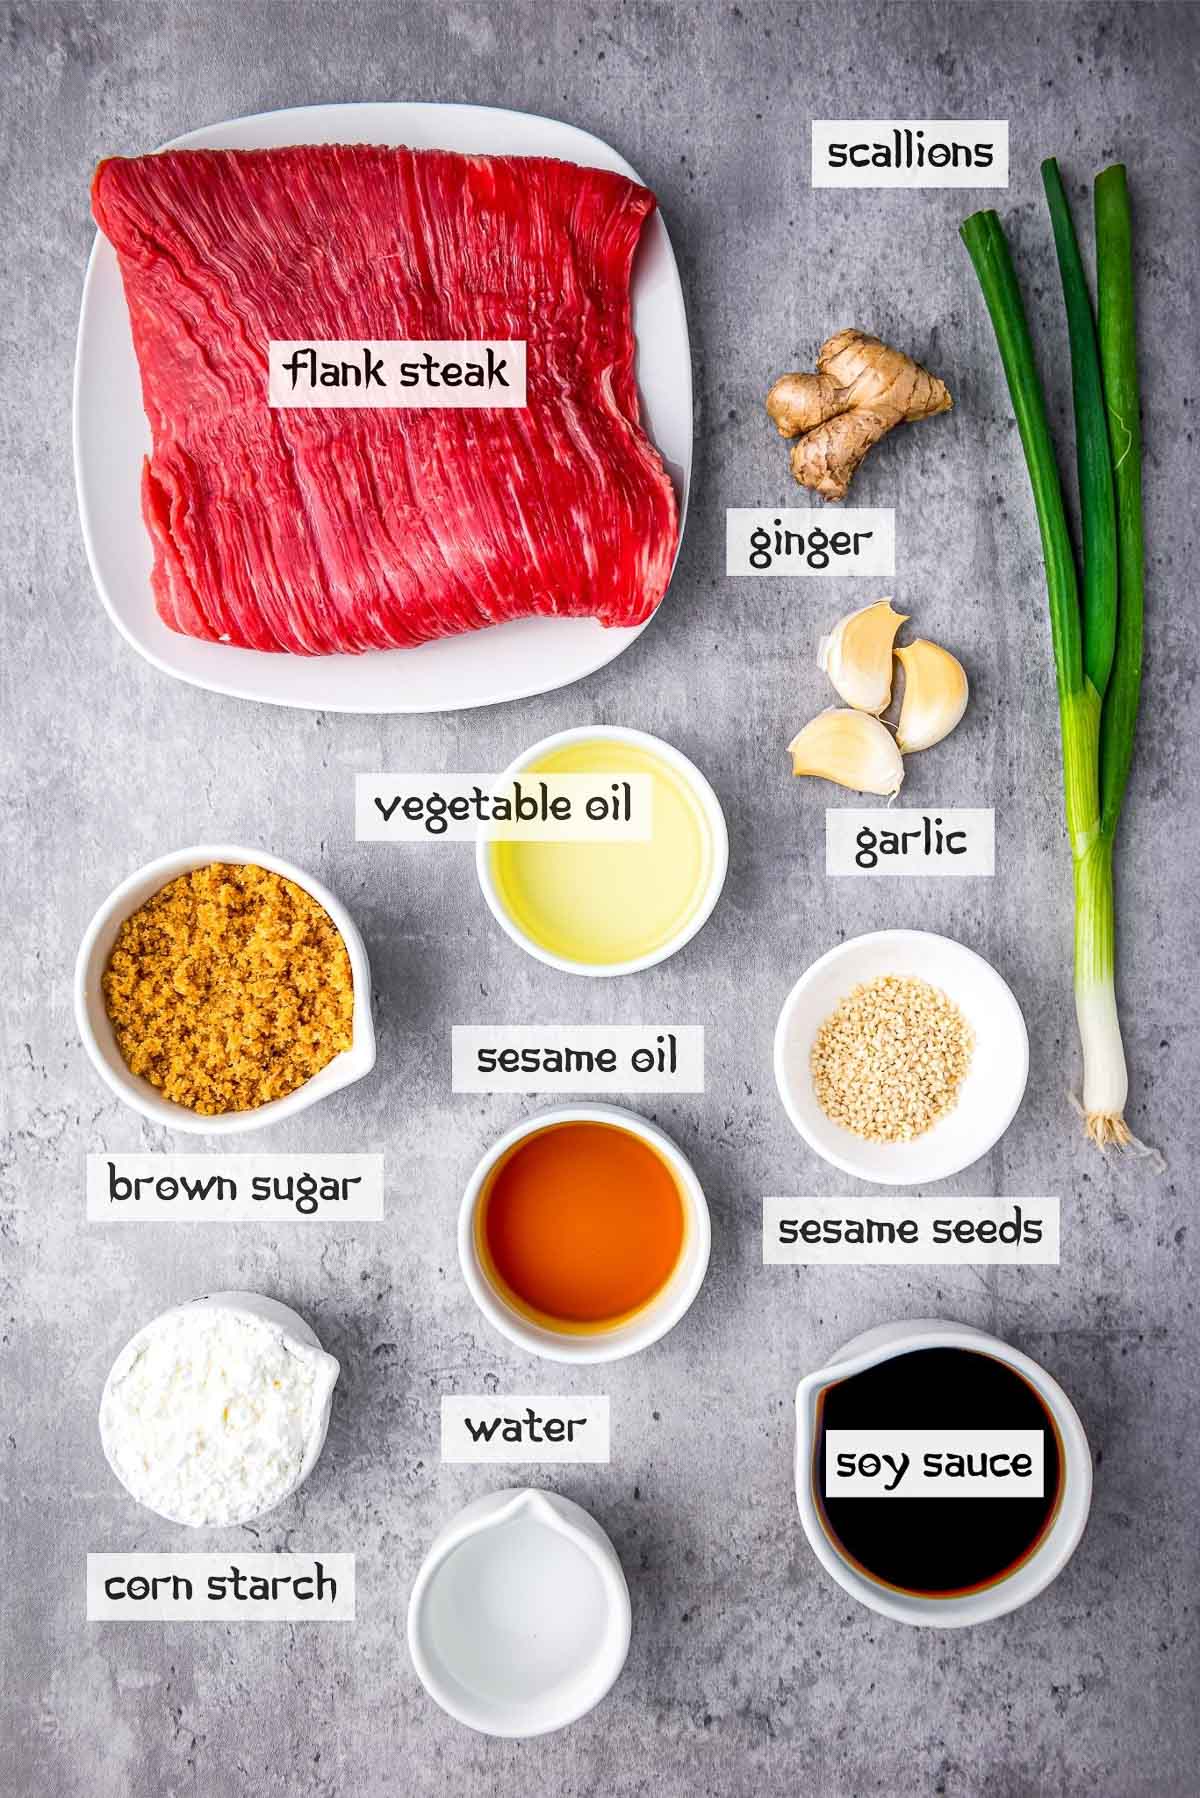 Labeled ingredients for making Slow Cooker Mongolian Beef in small bowls on top of a gray surface.